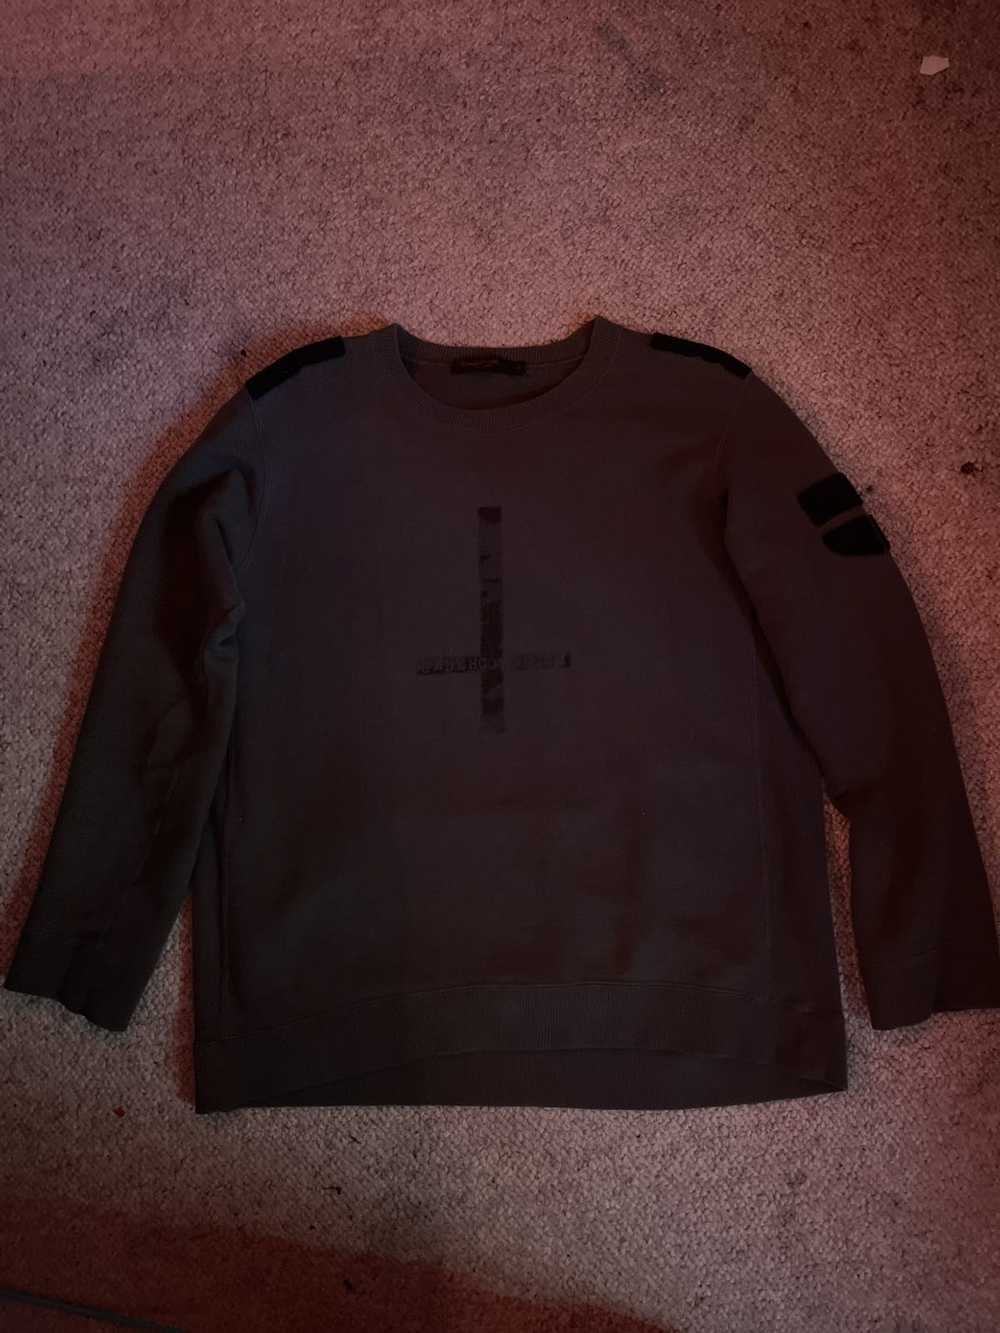 Undercover Undercover aw02 Velcro cross sweater - image 1